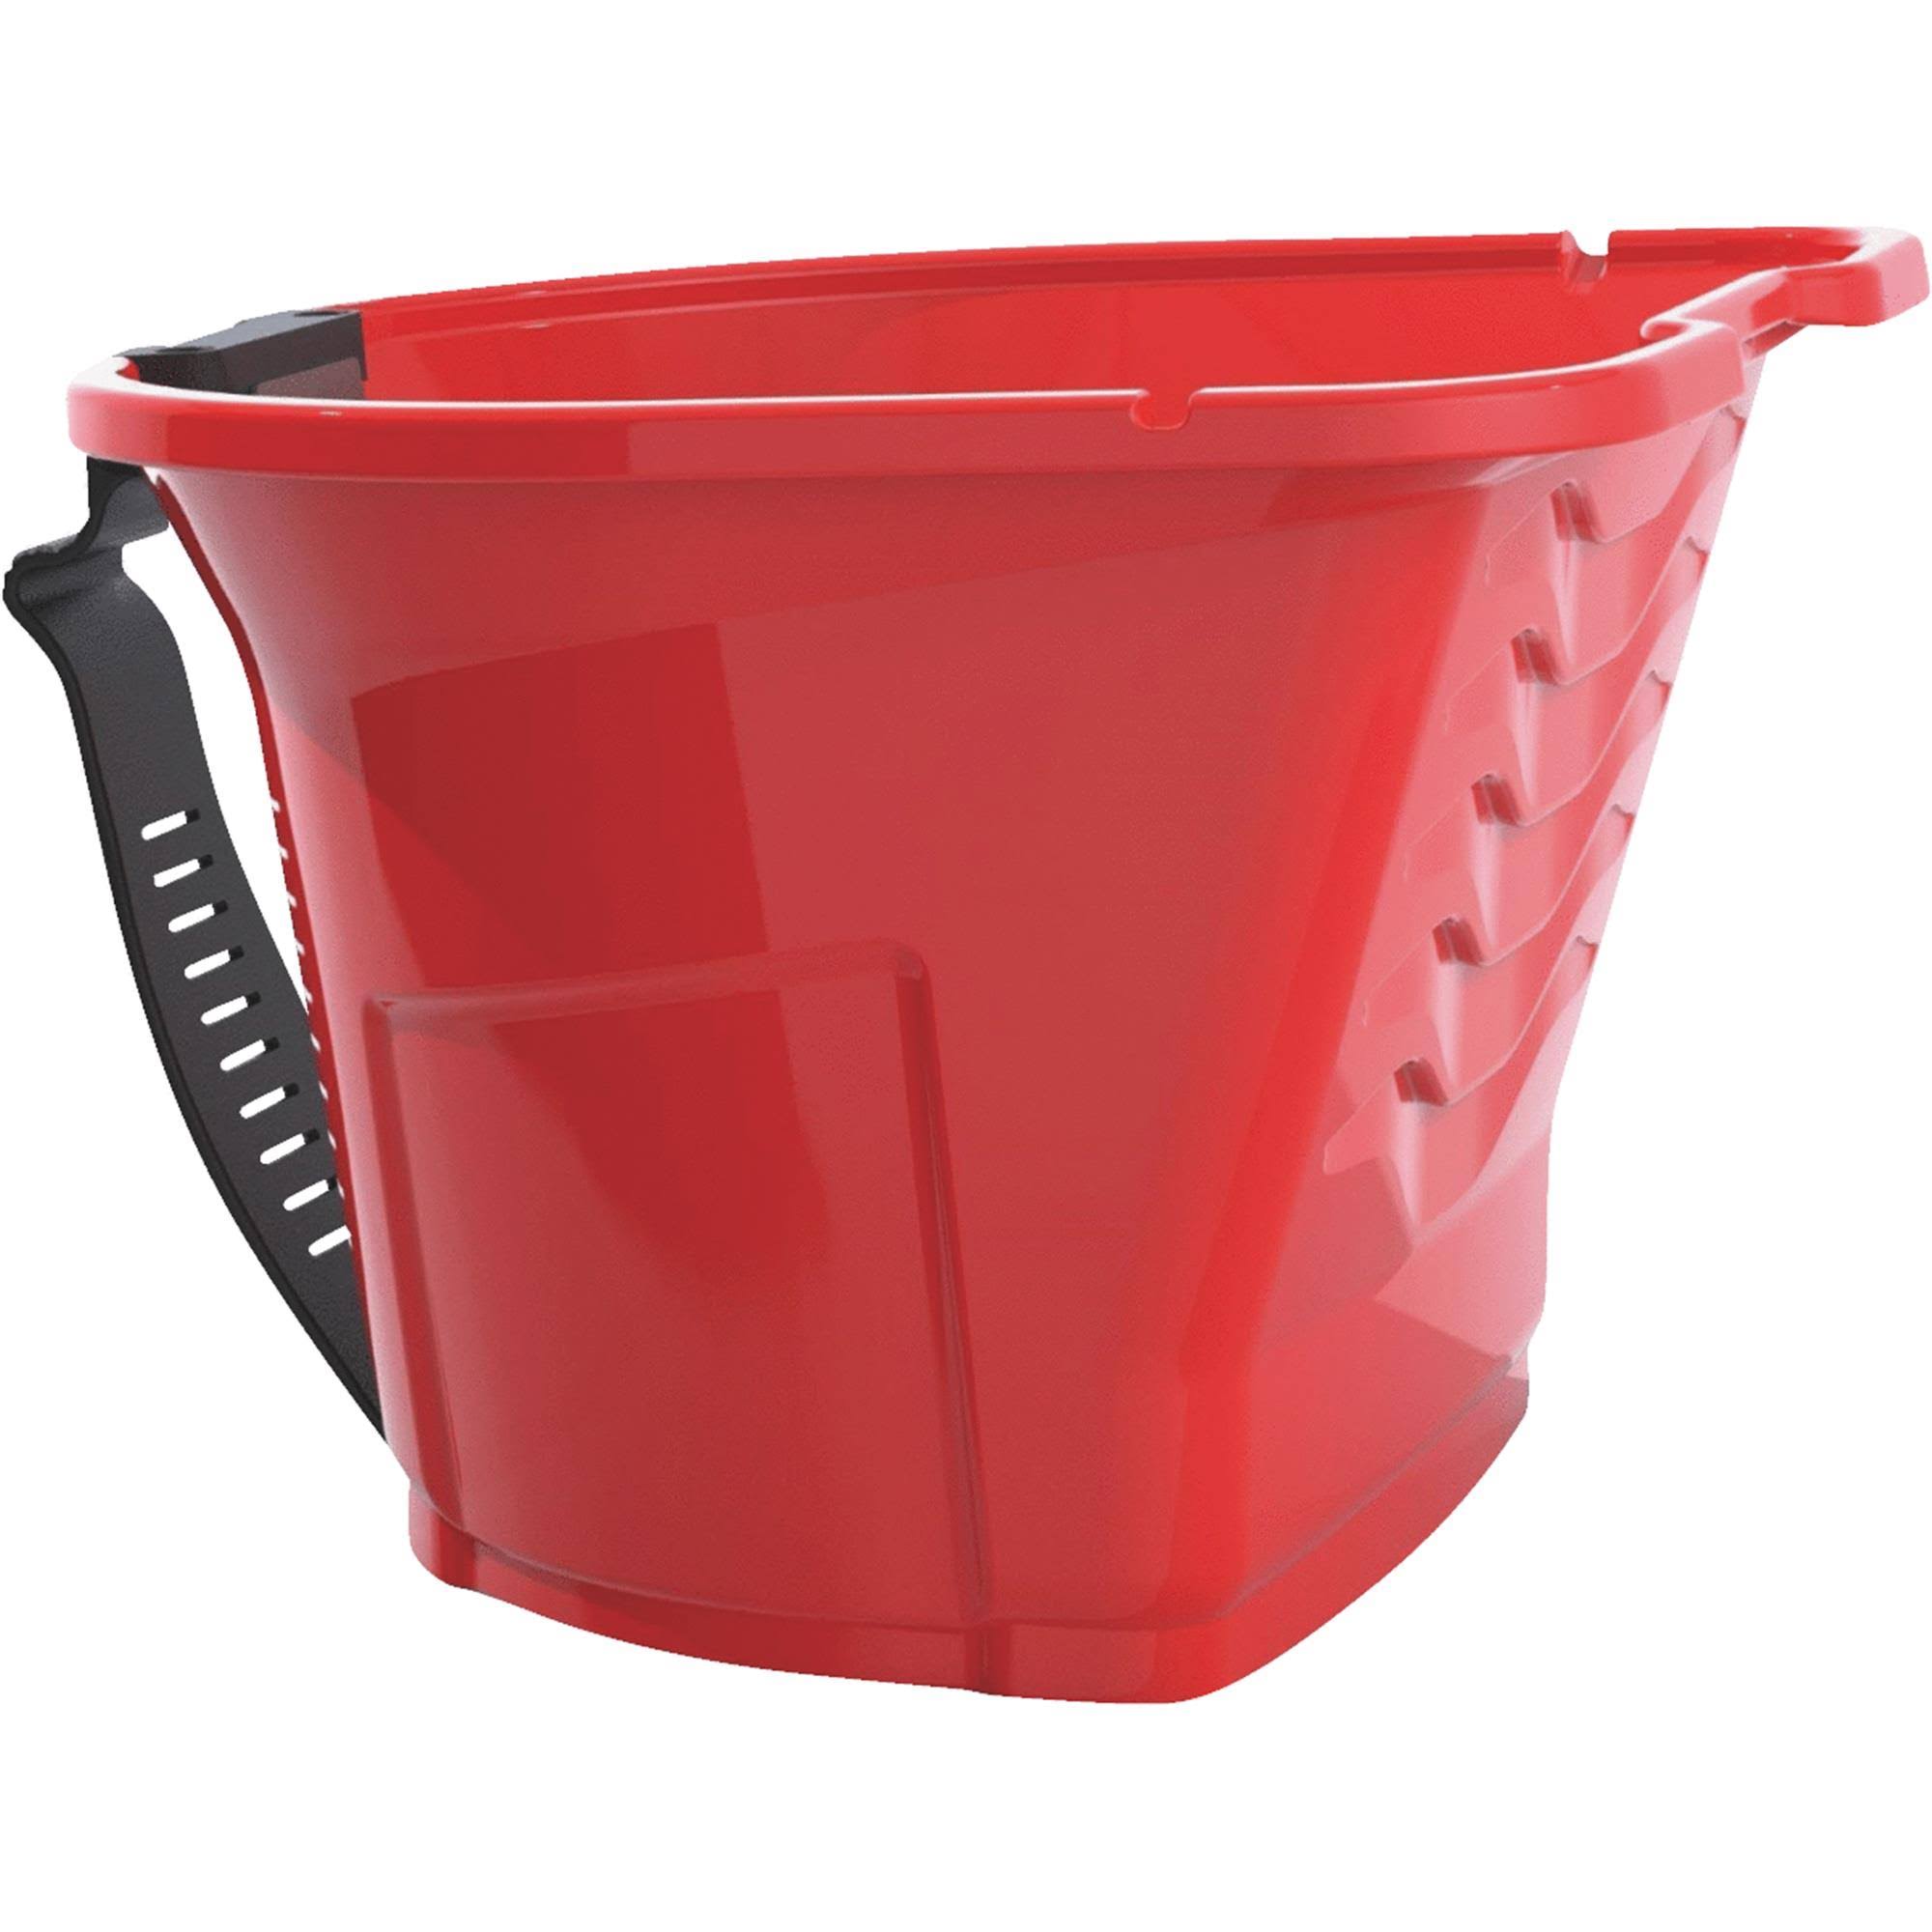 Handy Paint Pail - Red